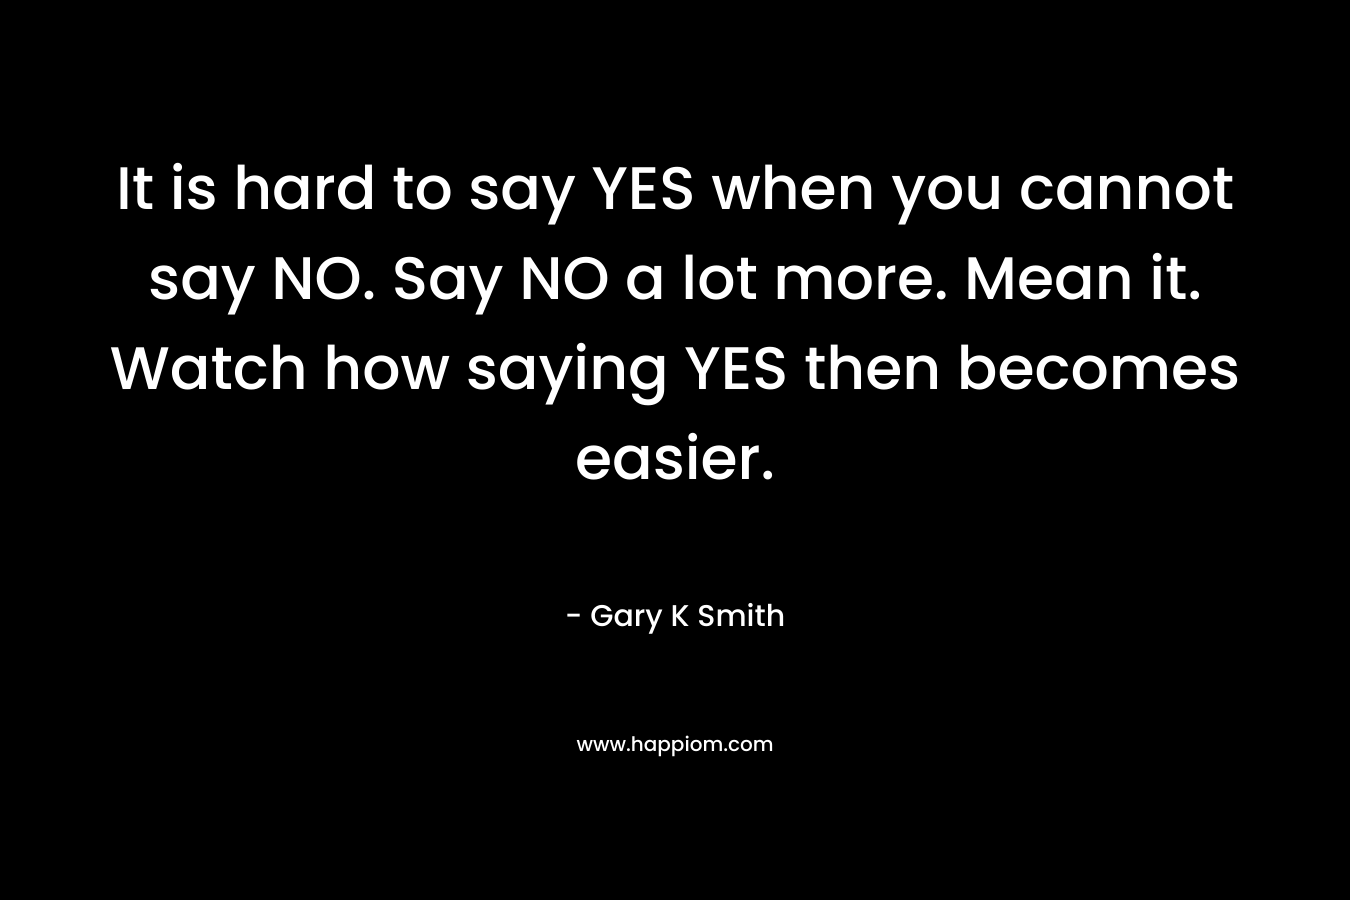 It is hard to say YES when you cannot say NO. Say NO a lot more. Mean it. Watch how saying YES then becomes easier.